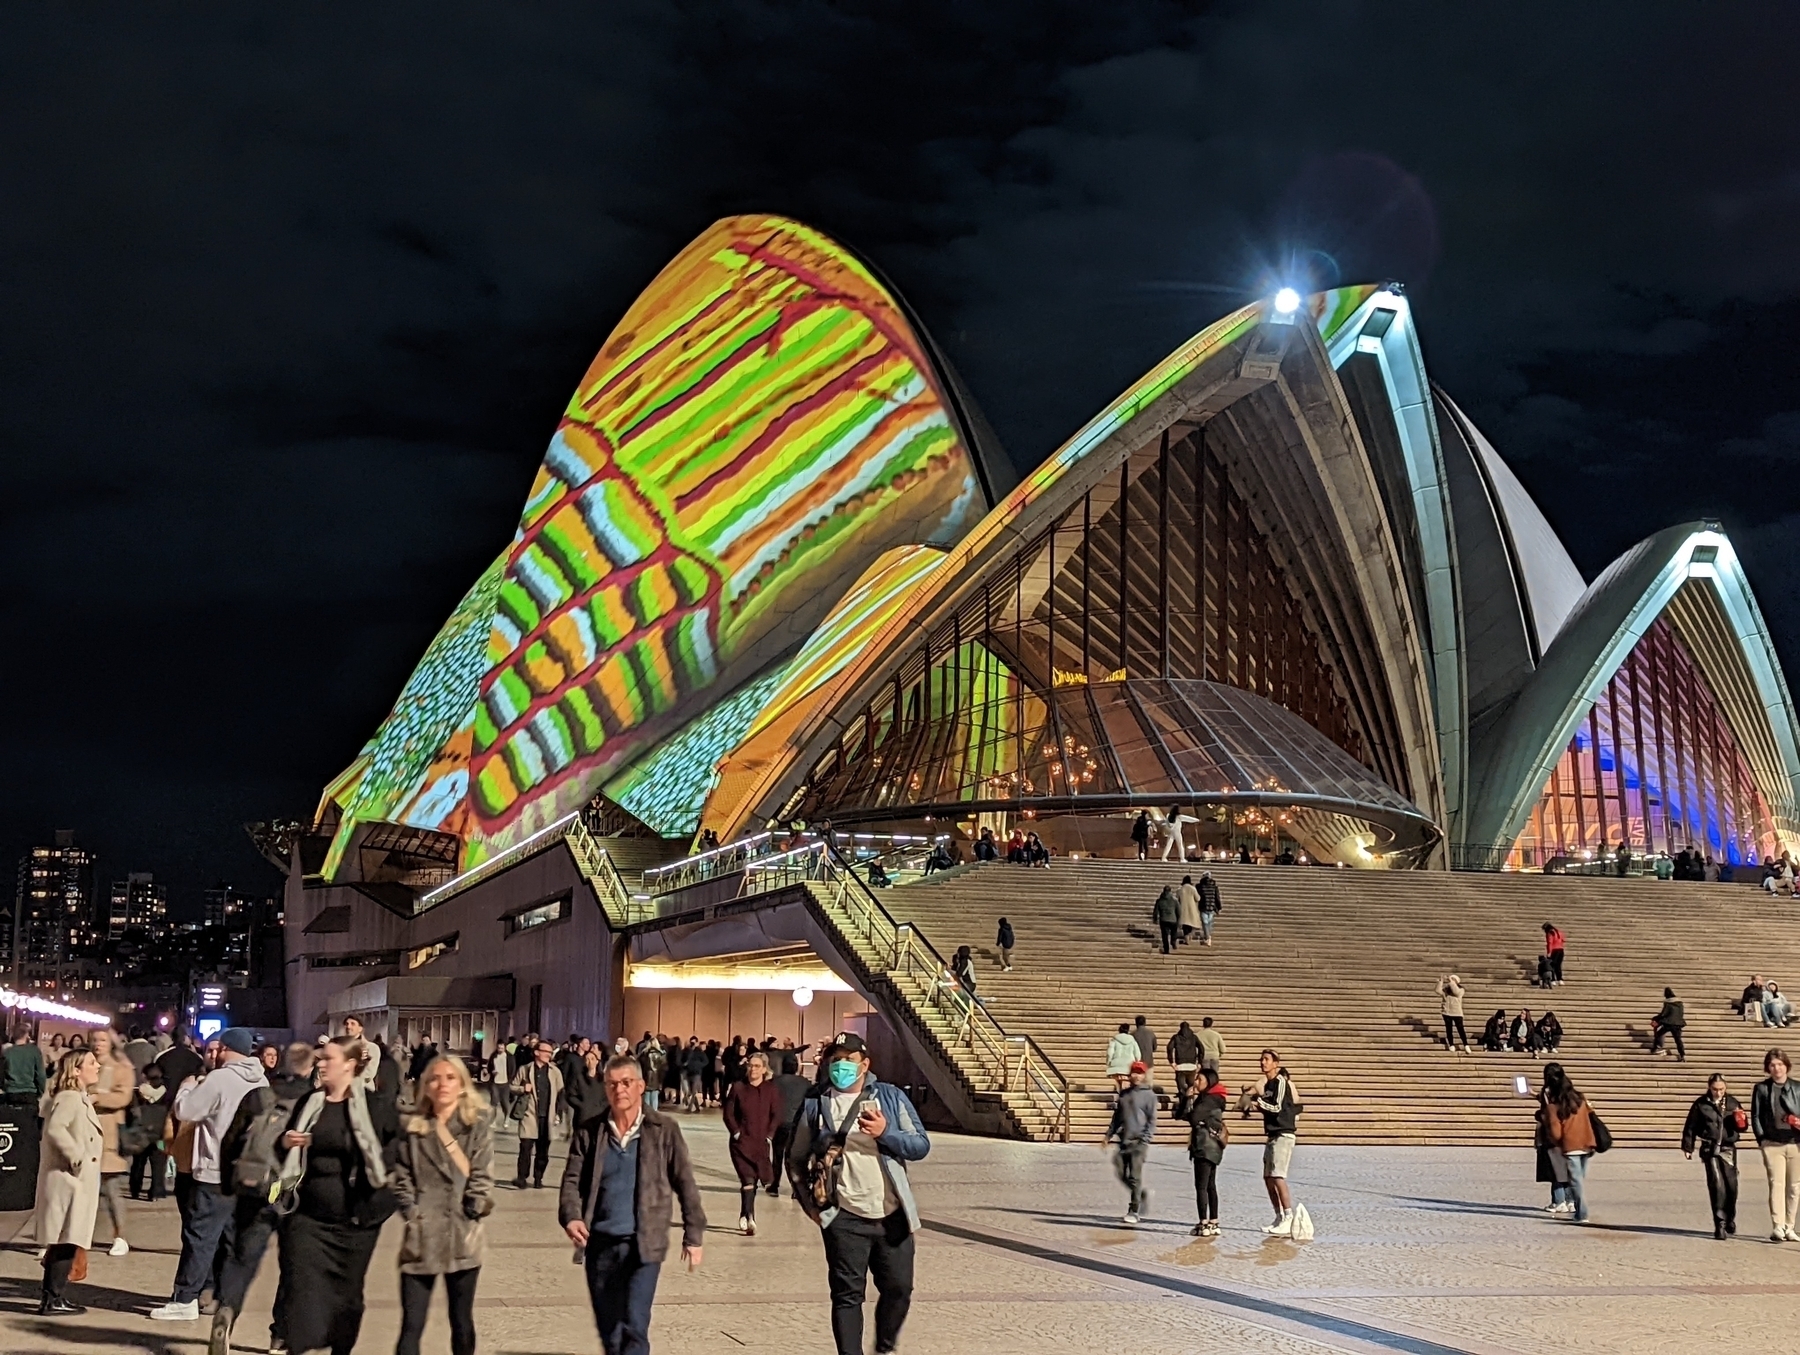 People walk past the front steps of Sydney Opera House. It’s dark and the  famous sails of the building’s roof are illuminated with an Aboriginal art motif.